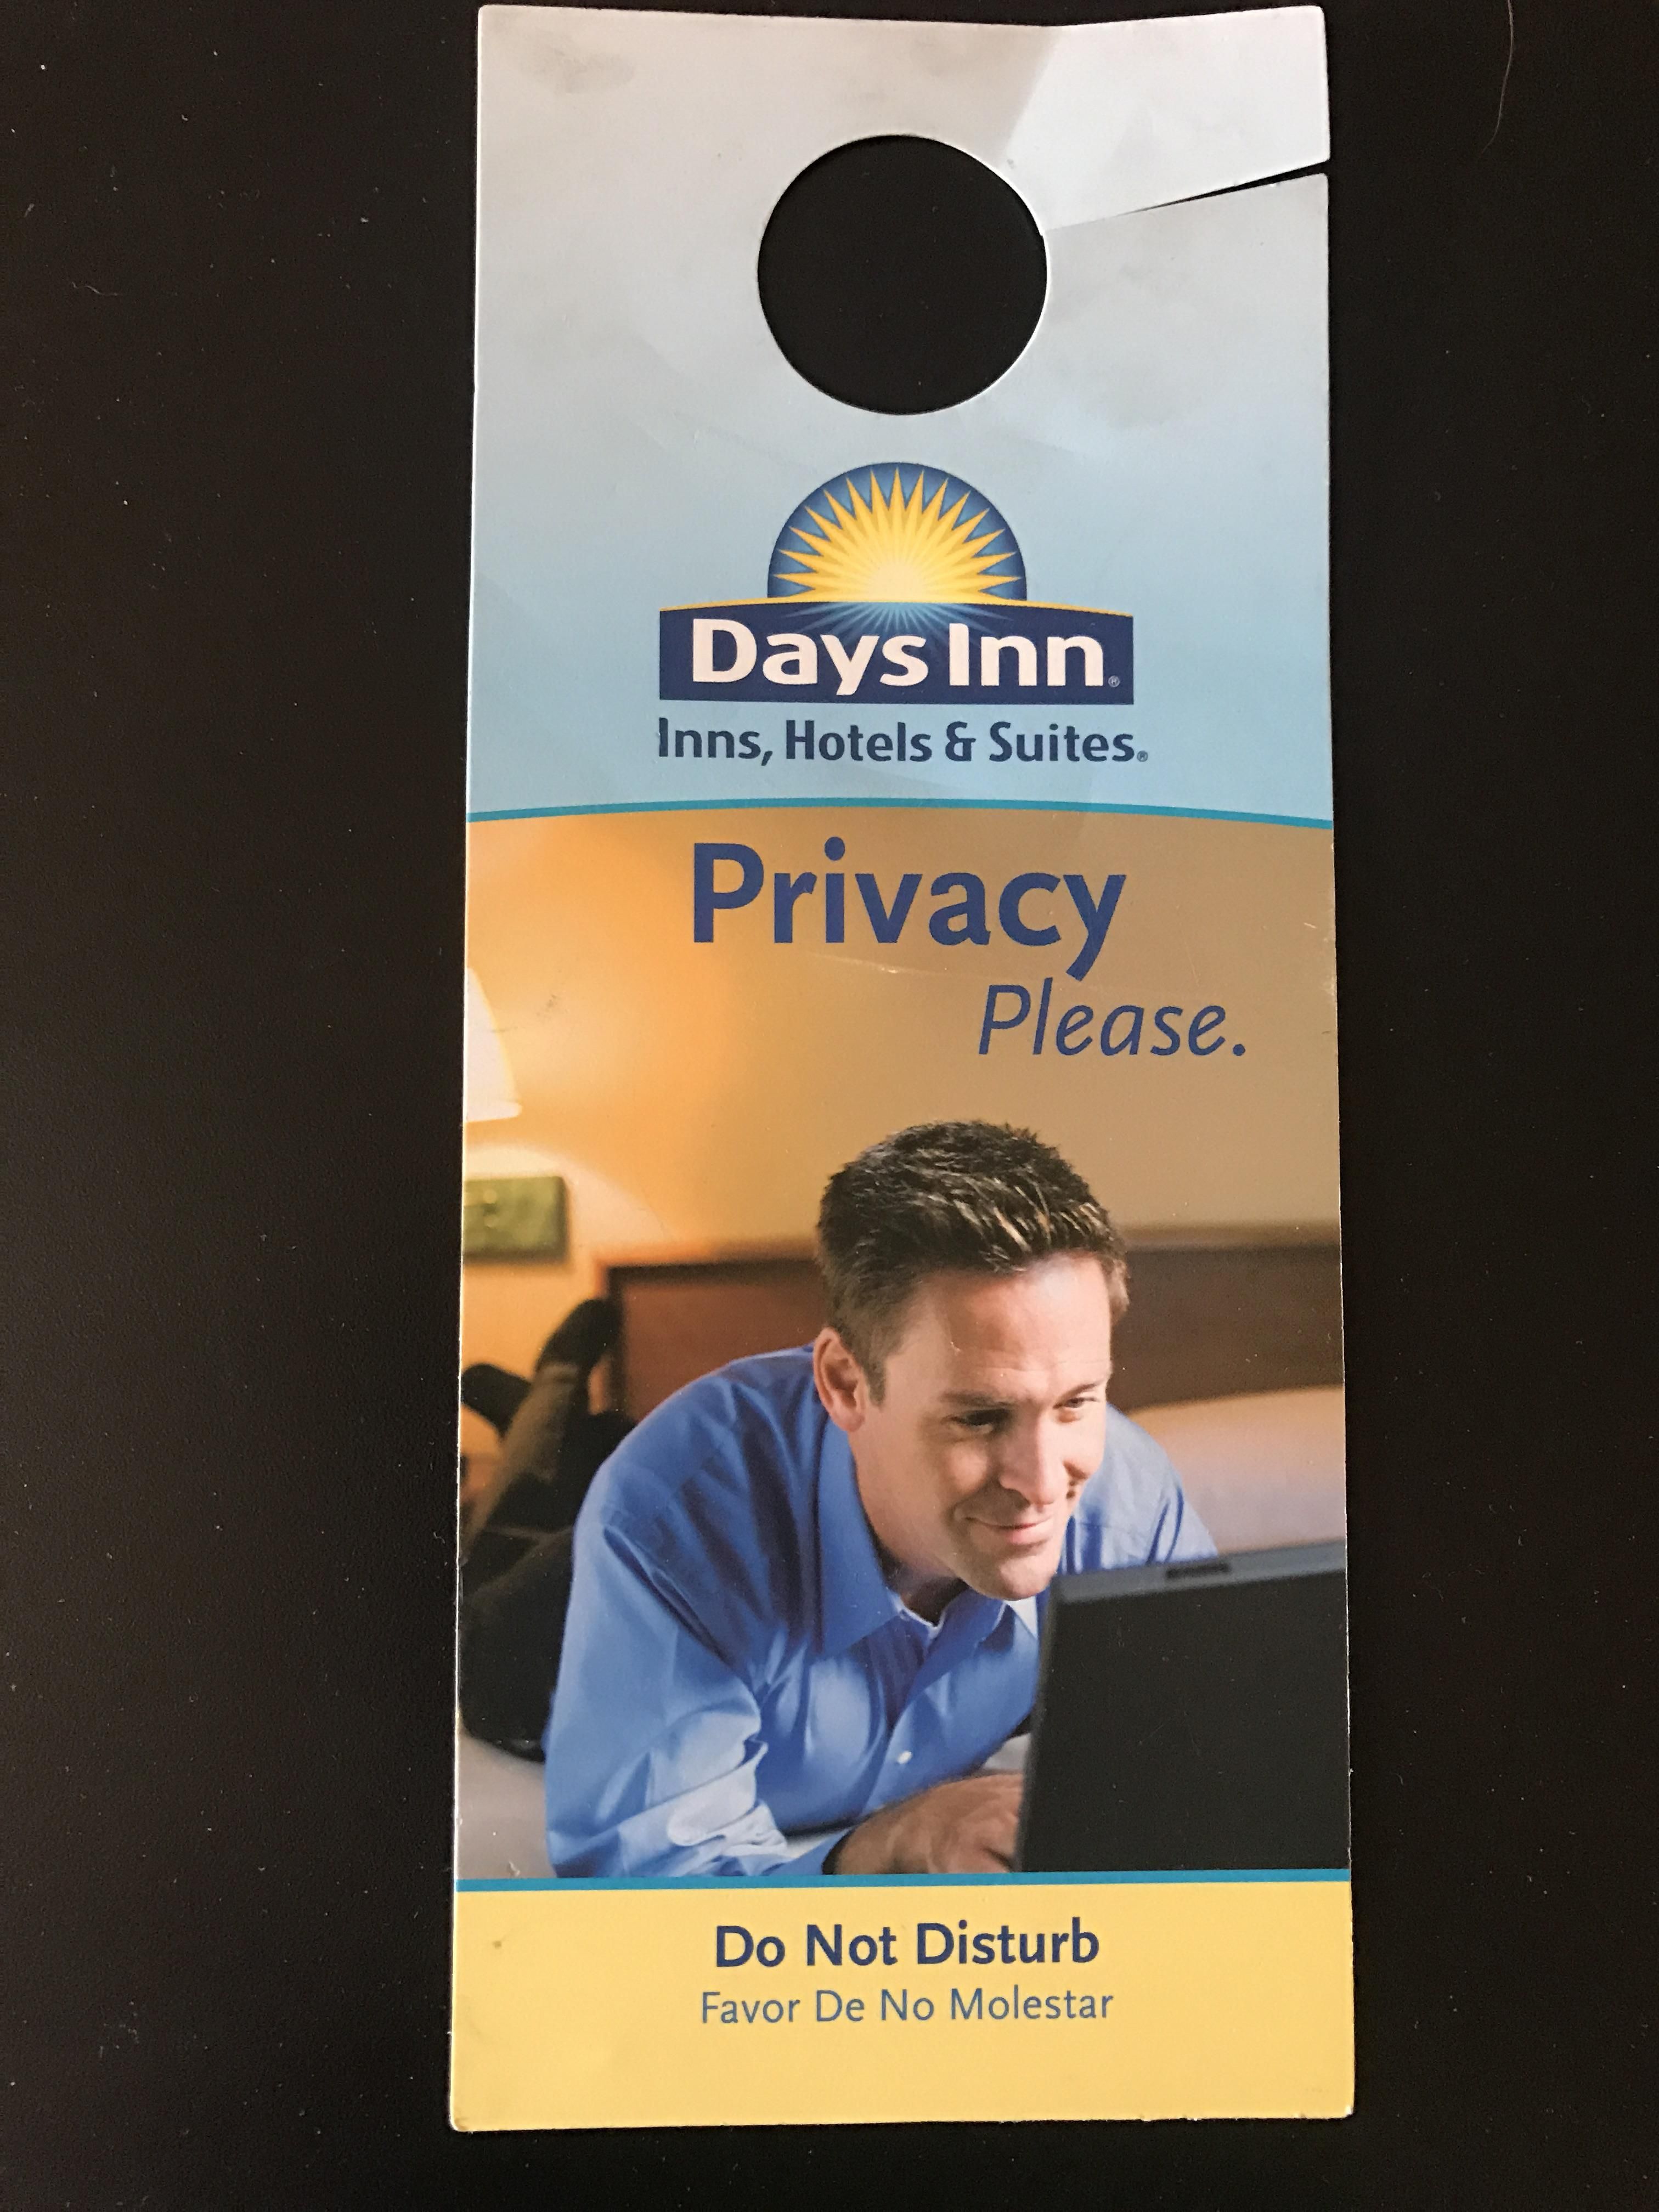 Days Inn knows why people really use this sign